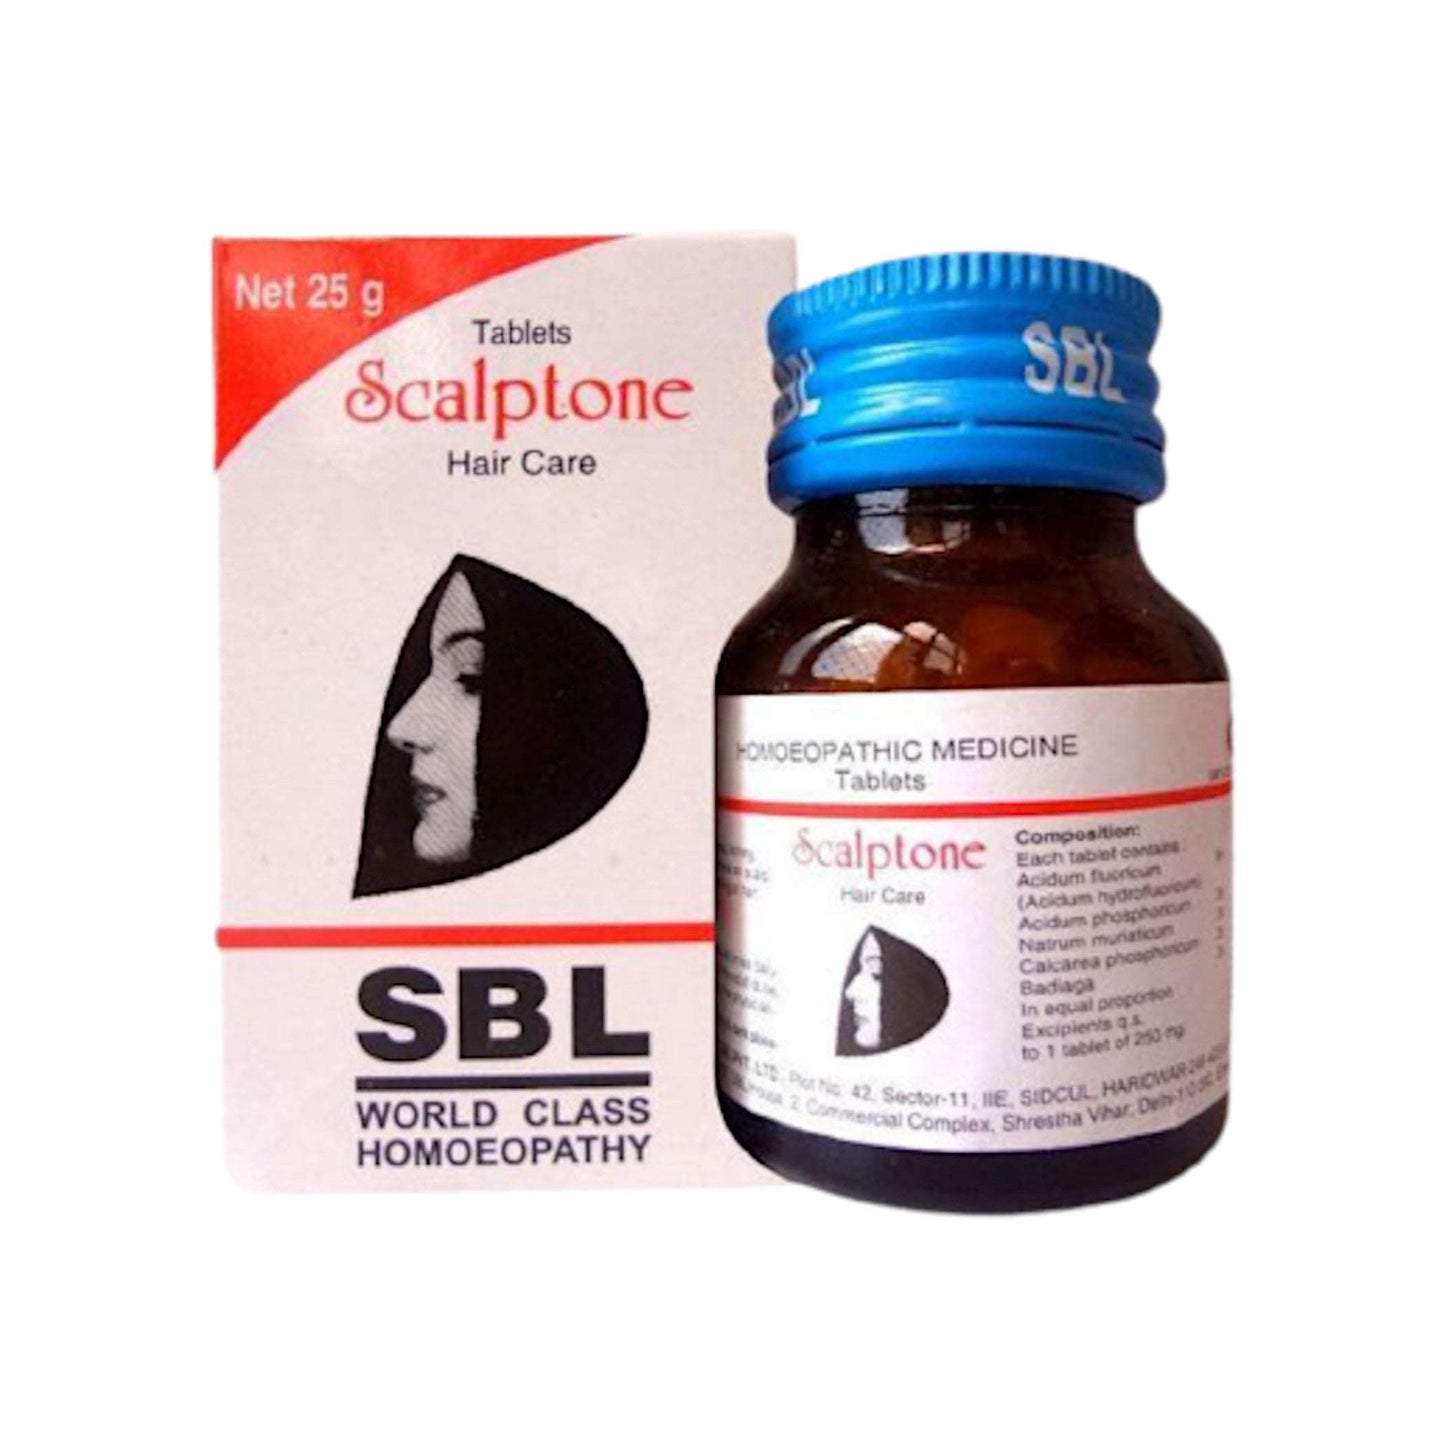 Image: SBL Rite-Hite Tablets 25 g - Homeopathic Growth Promoter for Children.